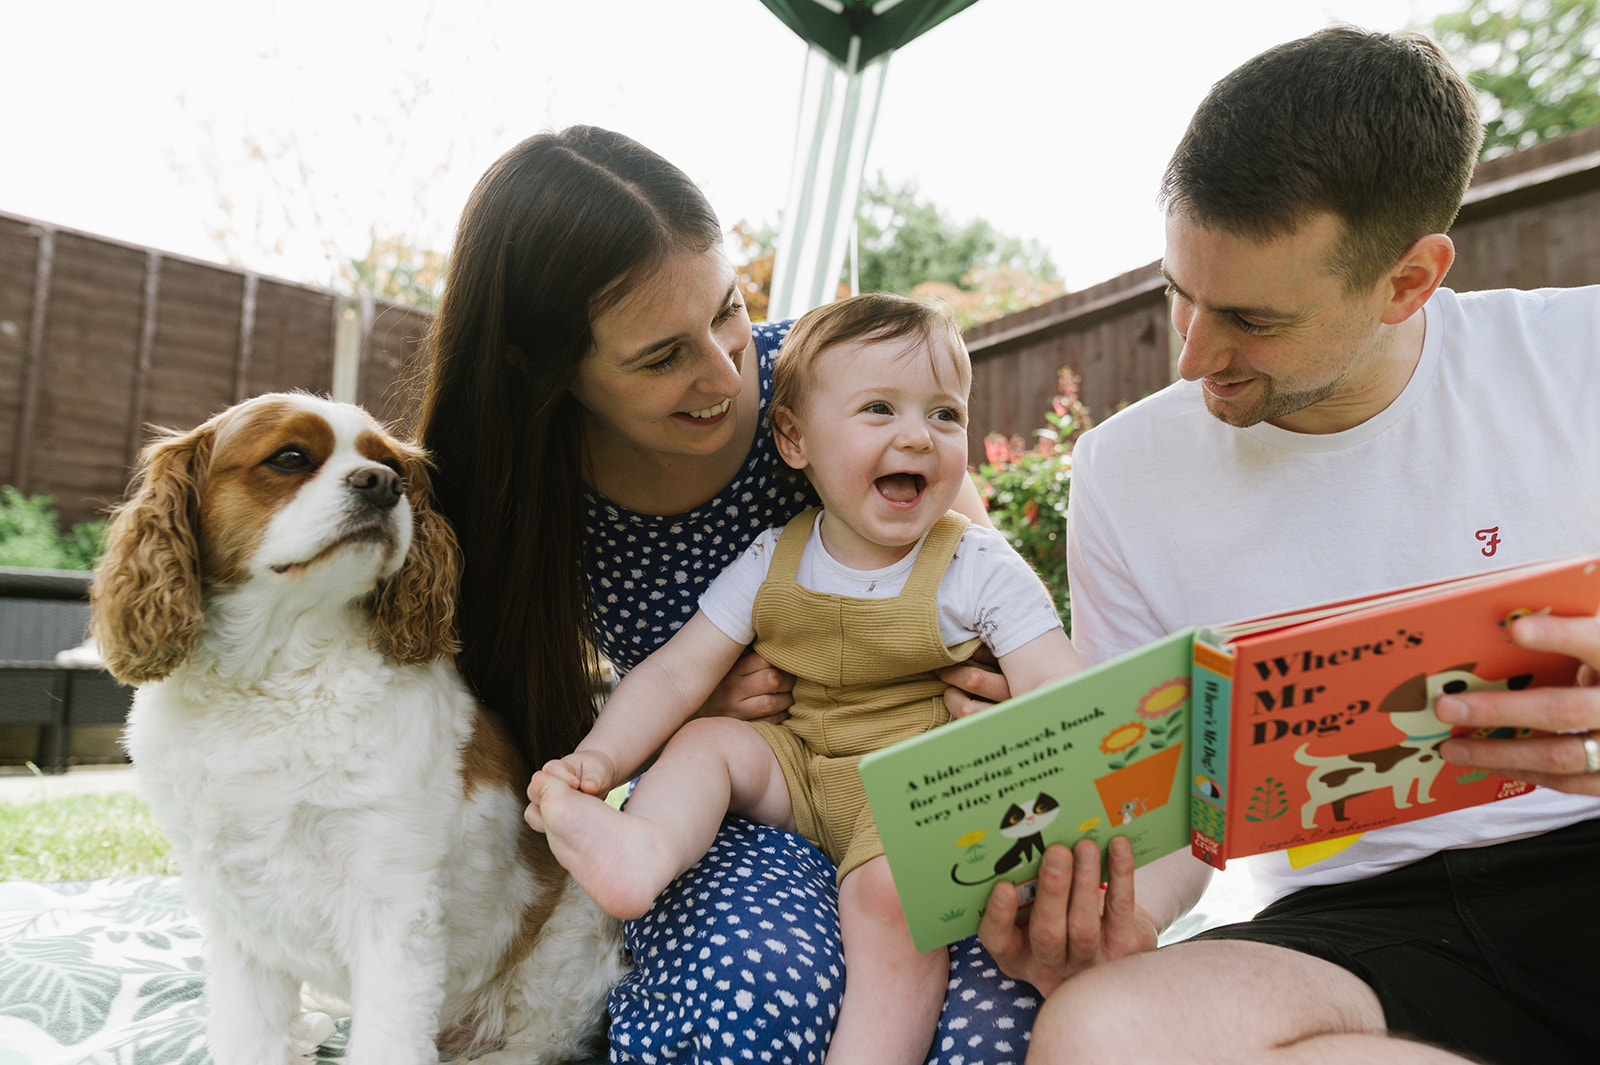 mum dad and one year old boy smiling as they read their book in the garden. their dog is sitting with them